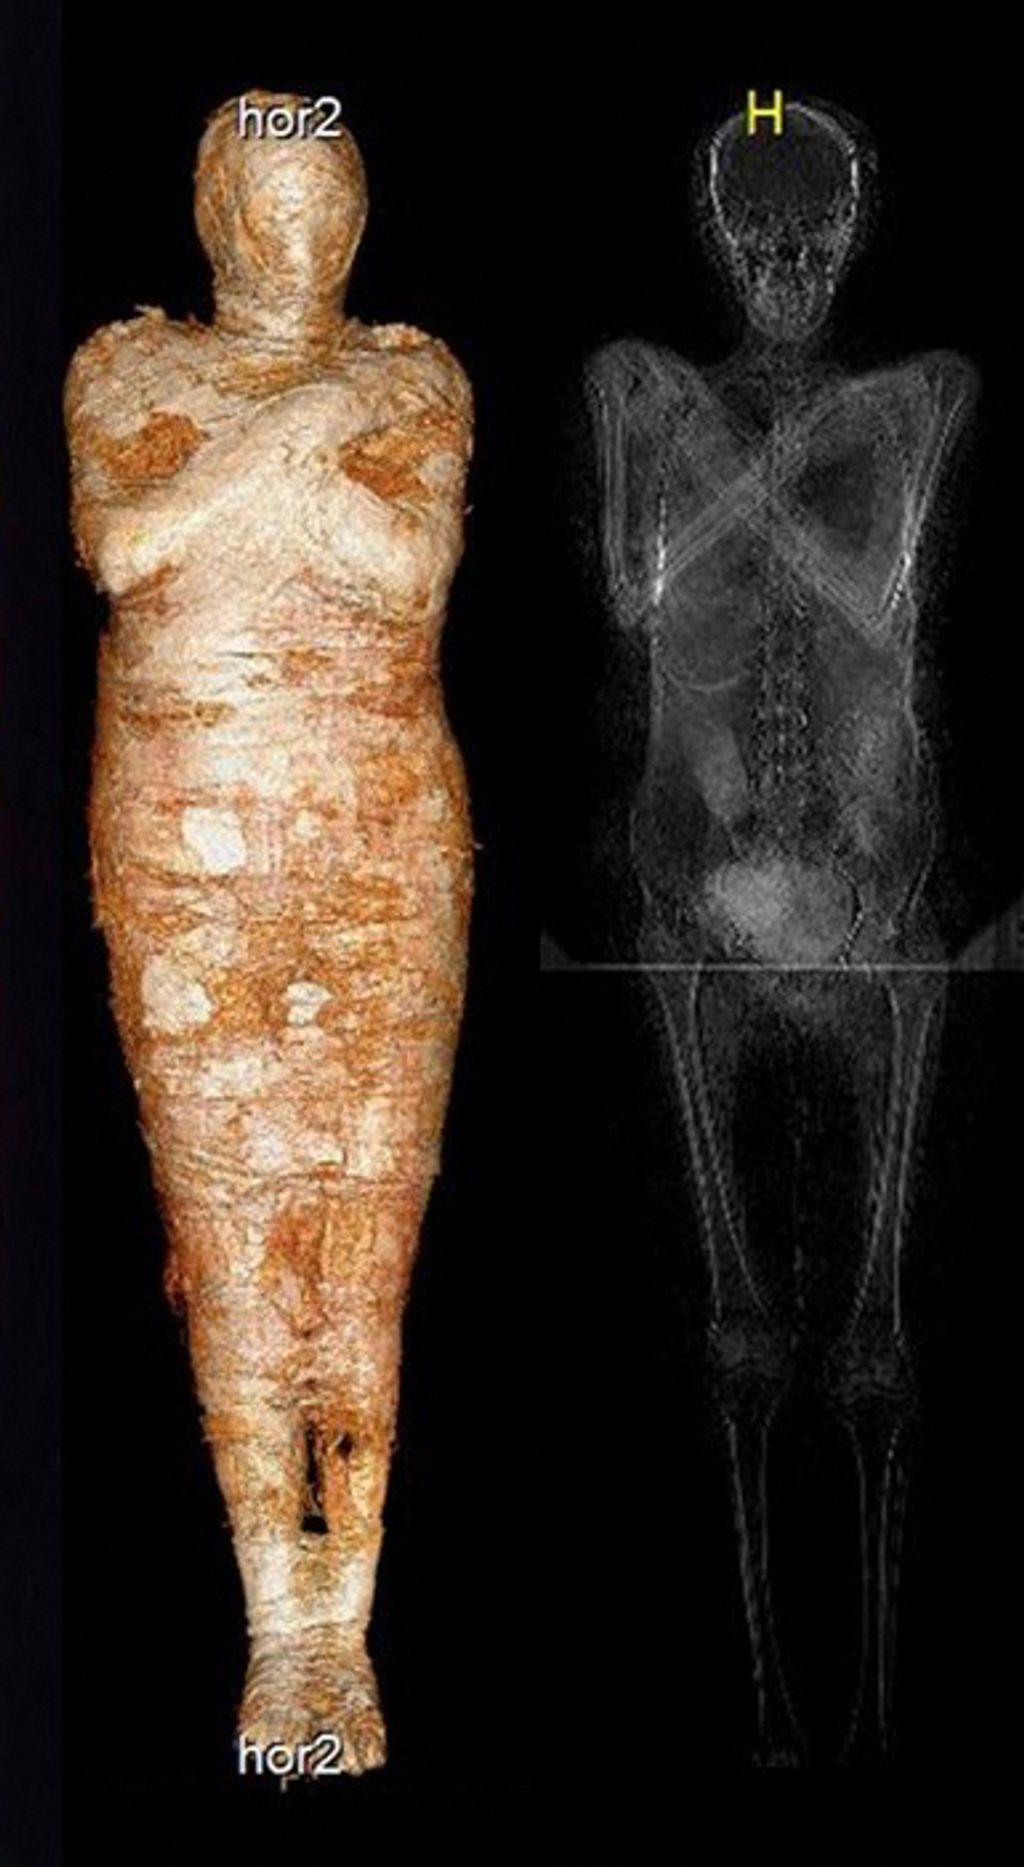 Mummy-to-be: Pregnant embalmed body identified in Poland archaeology Vertical verticalstrip 